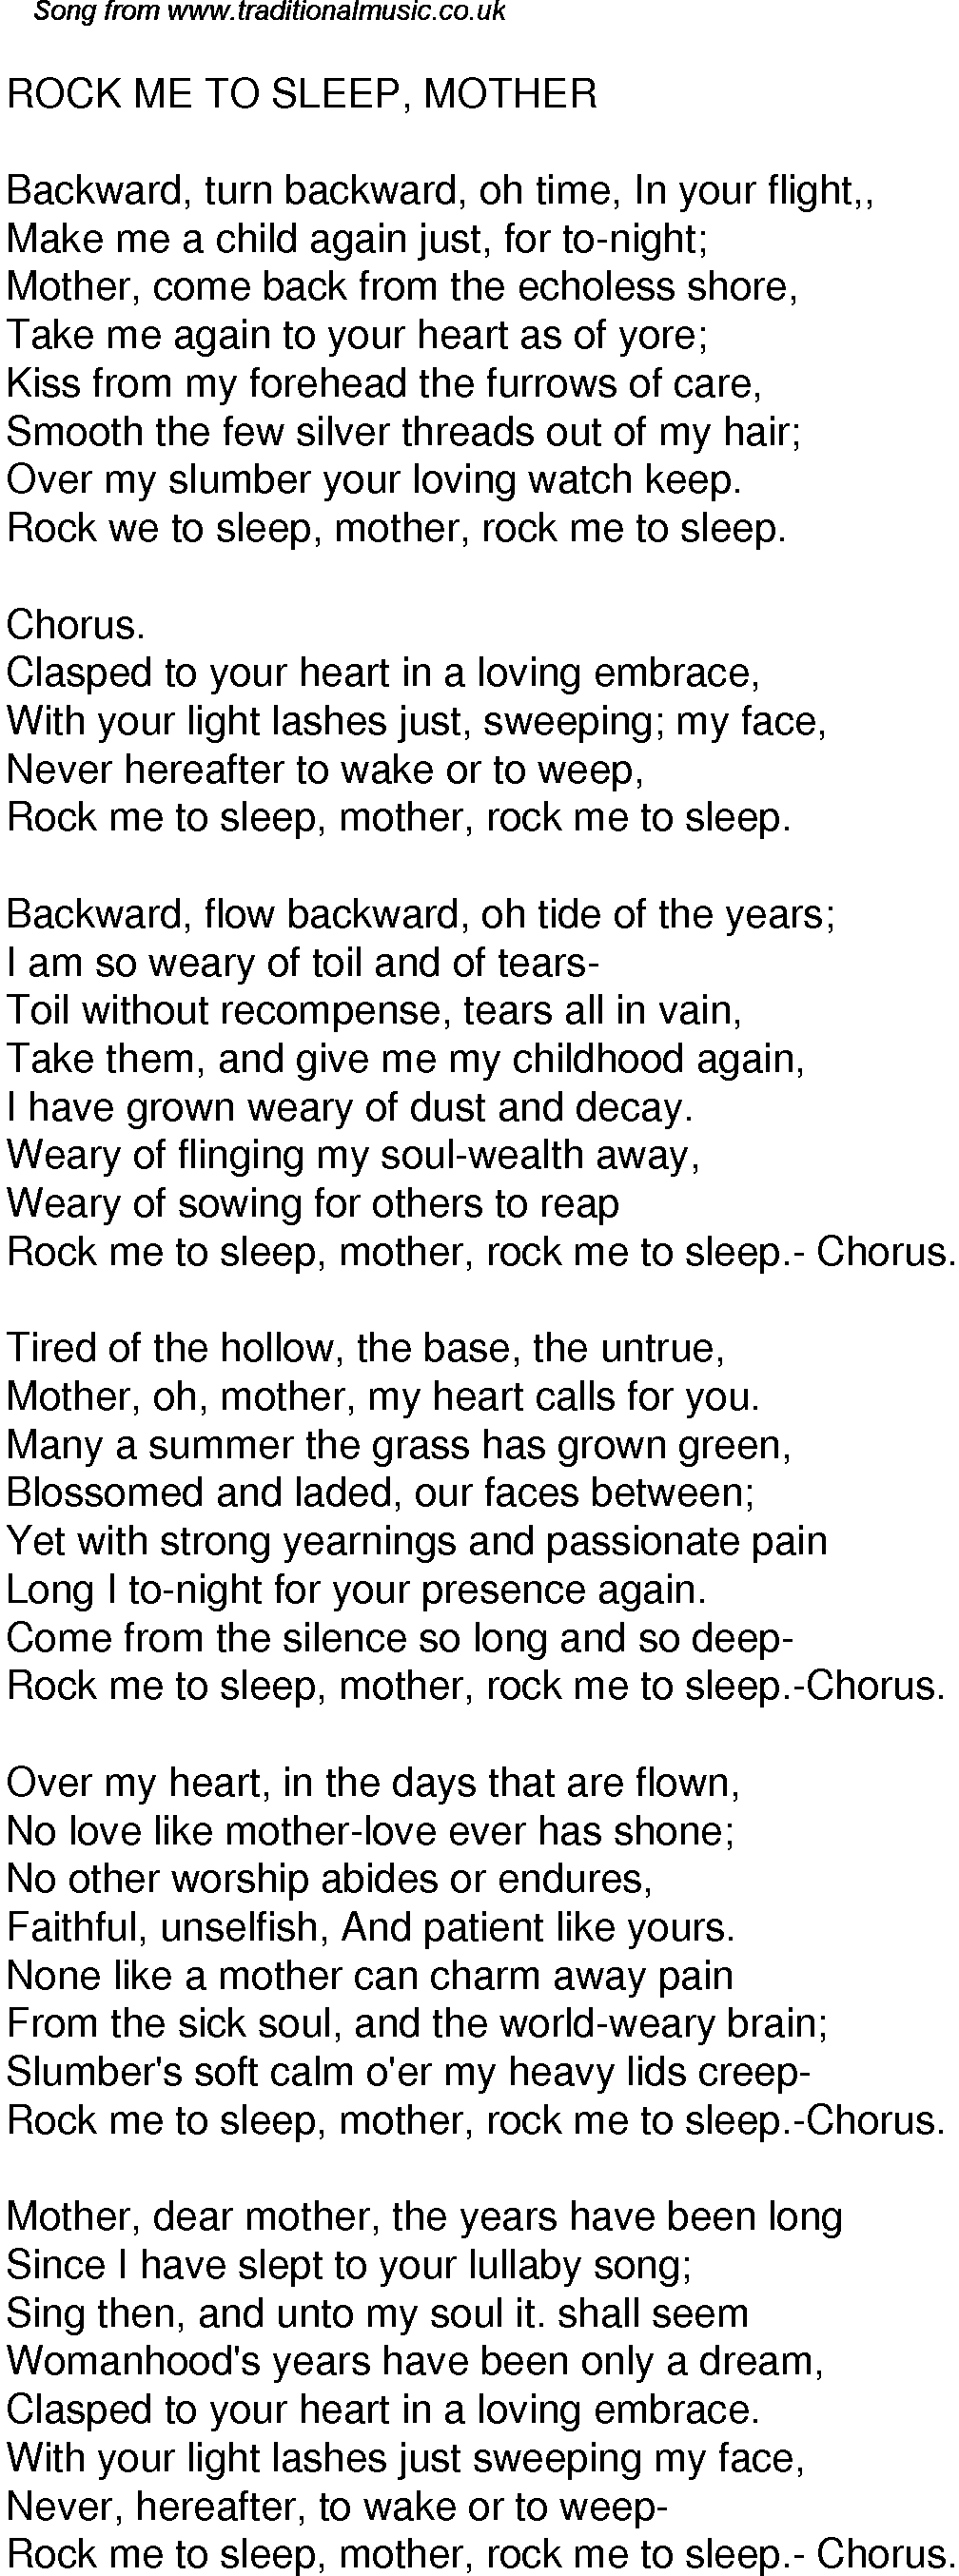 Old Time Song Lyrics For 40 Rock Me To Sleep Mother